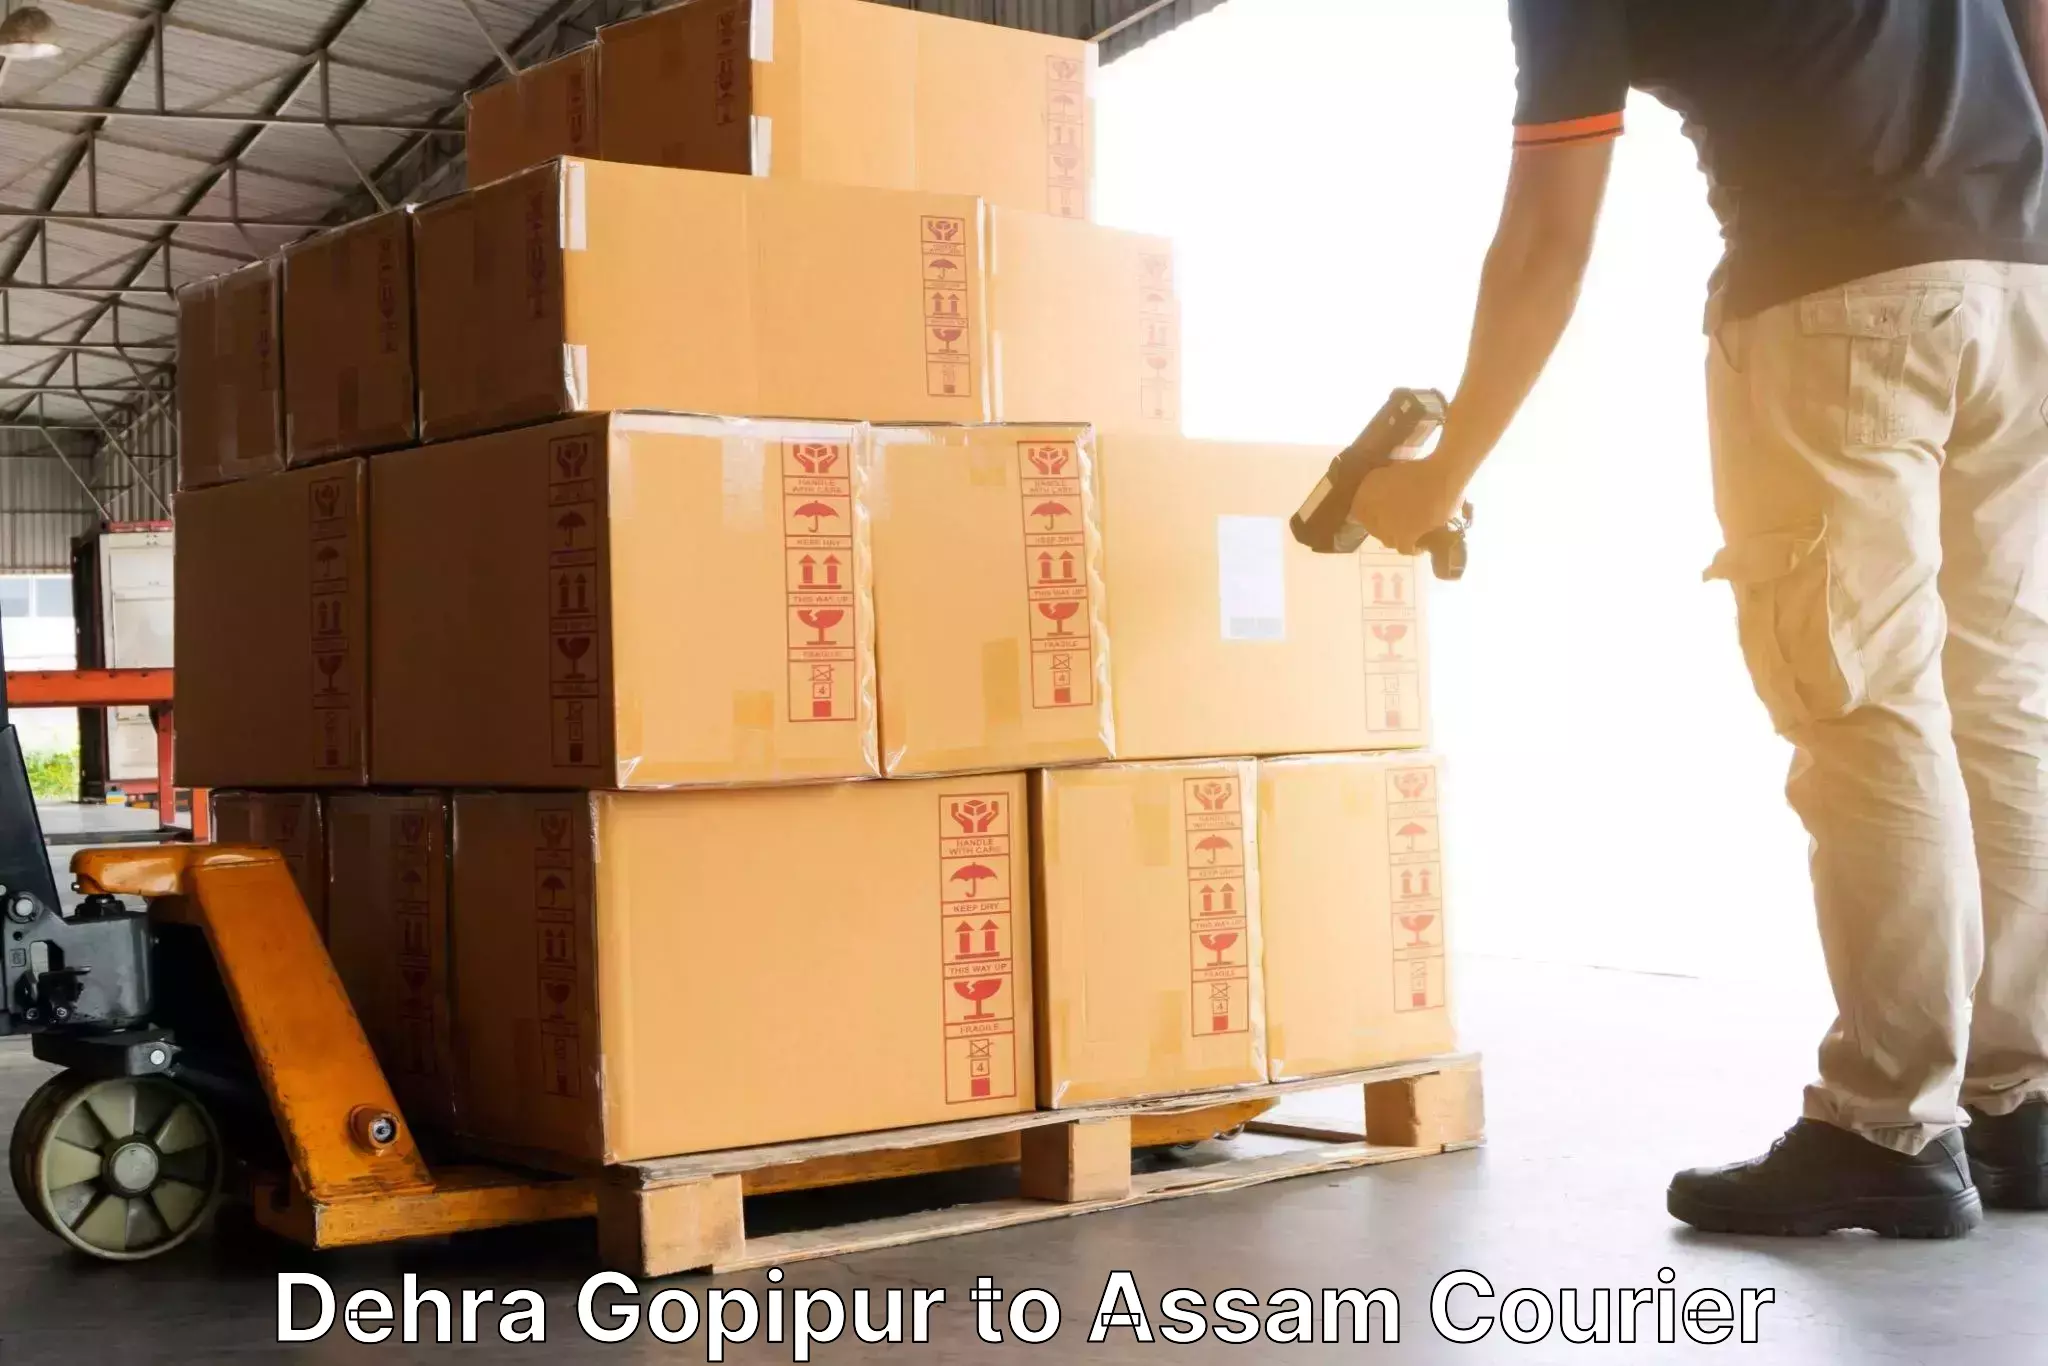 End-to-end delivery in Dehra Gopipur to Assam